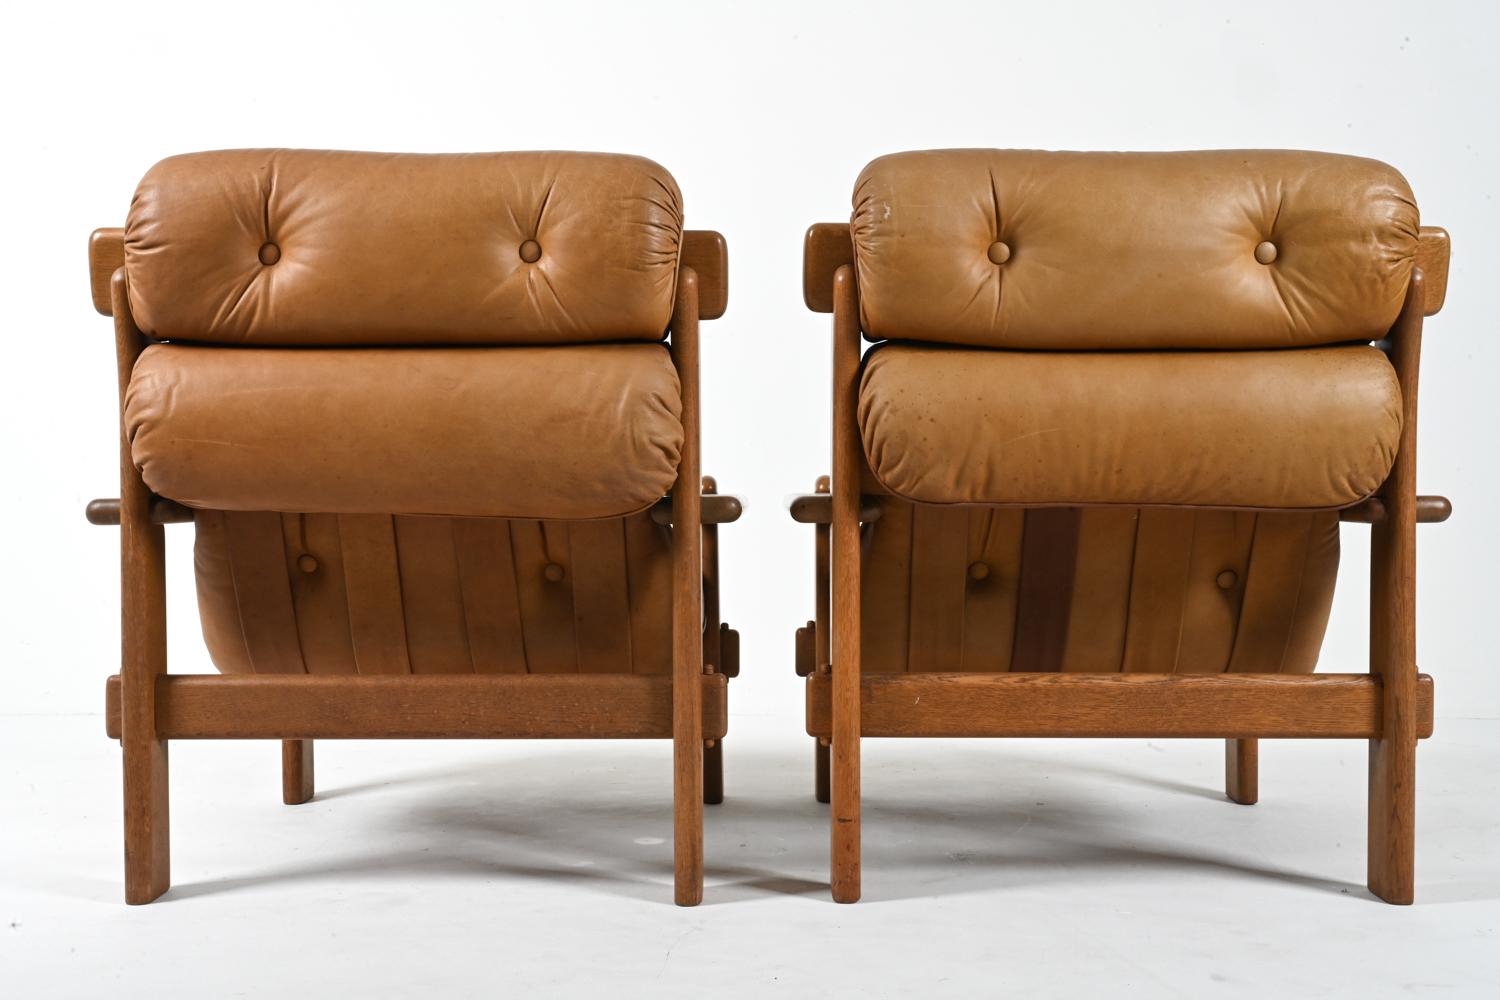 Pair of European Brutalist Armchairs in Oak & Leather, c. 1970's For Sale 10